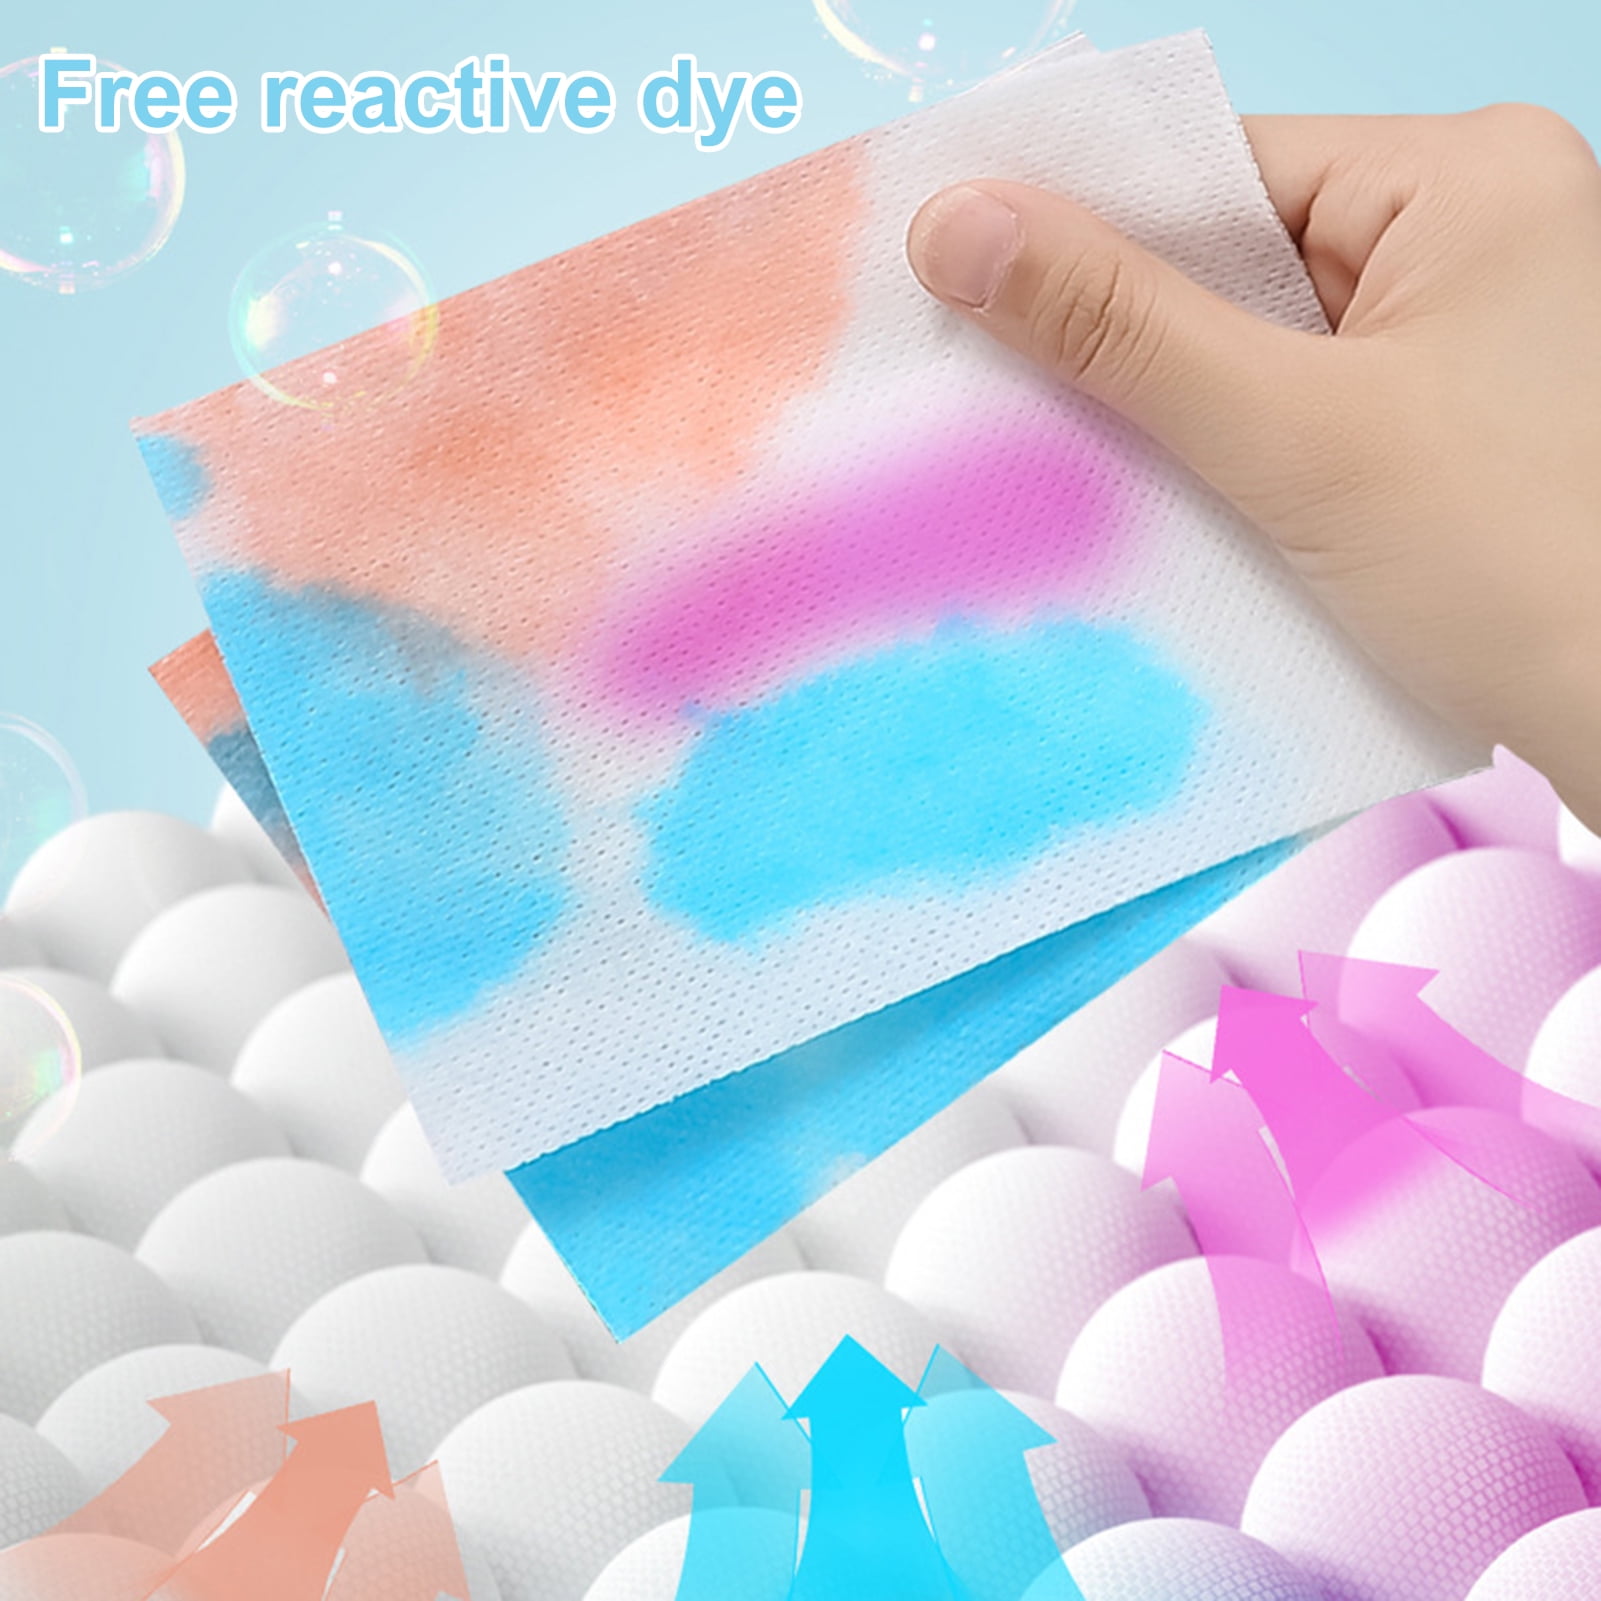 48 Pieces Anti-Dyeing Color Absorption Sheet,Color Absorption Sheet Laundry  Papers,Fragrance Free Color Grabber Essential for Home Use,Color Guard